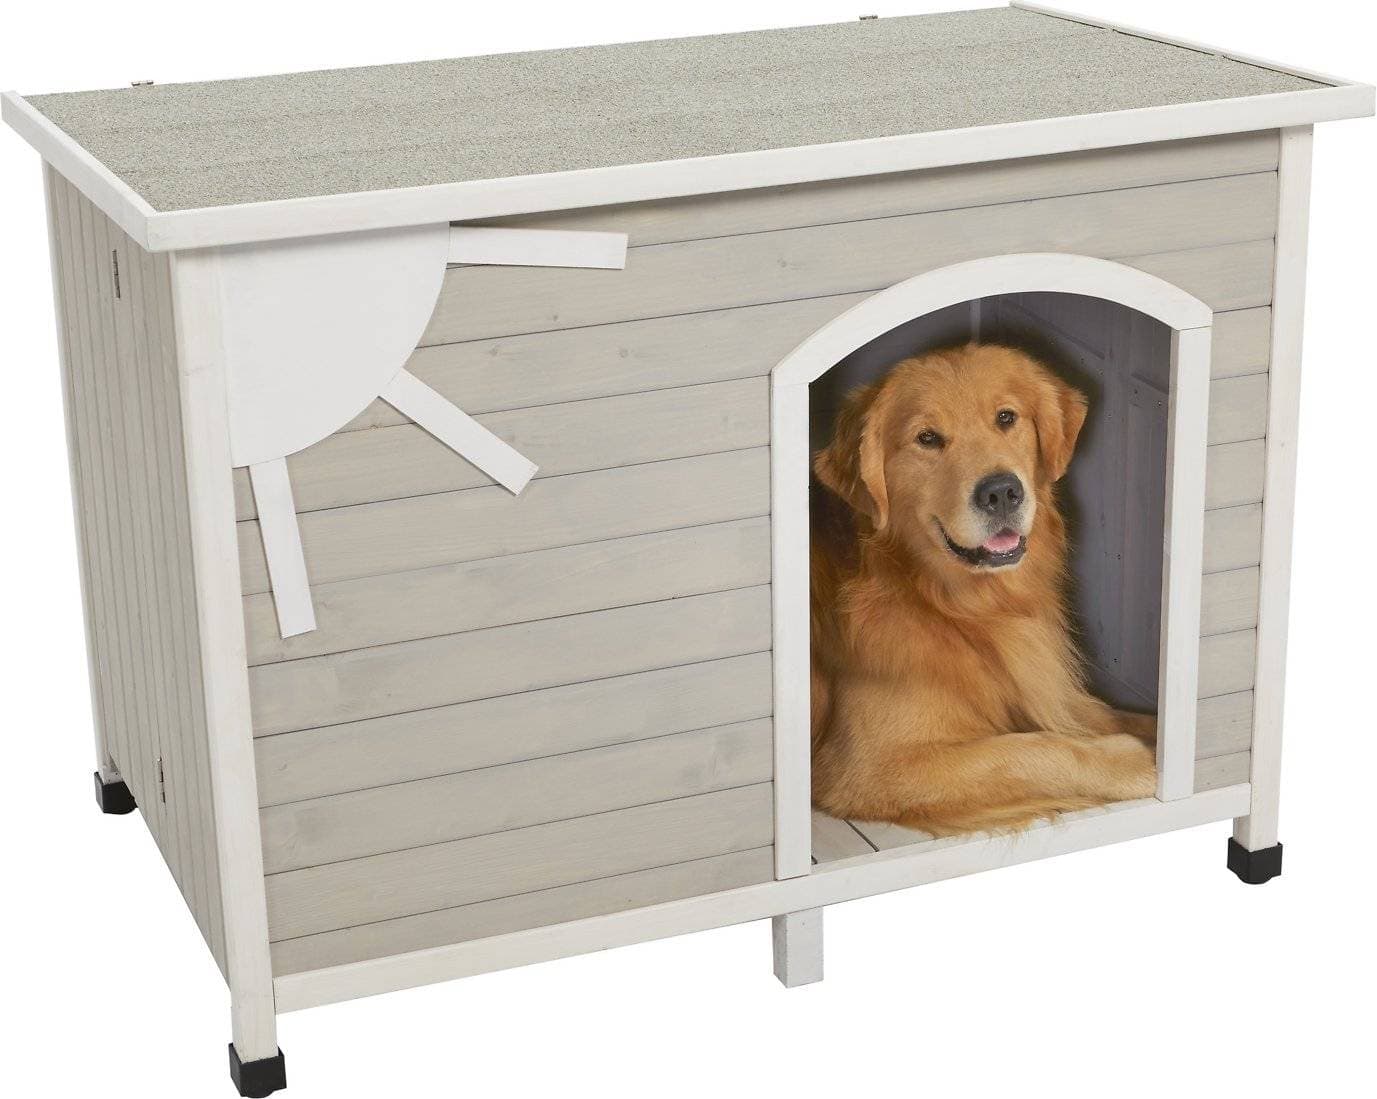 Midwest Eillo Folding Outdoor Wood Doghouse (1)